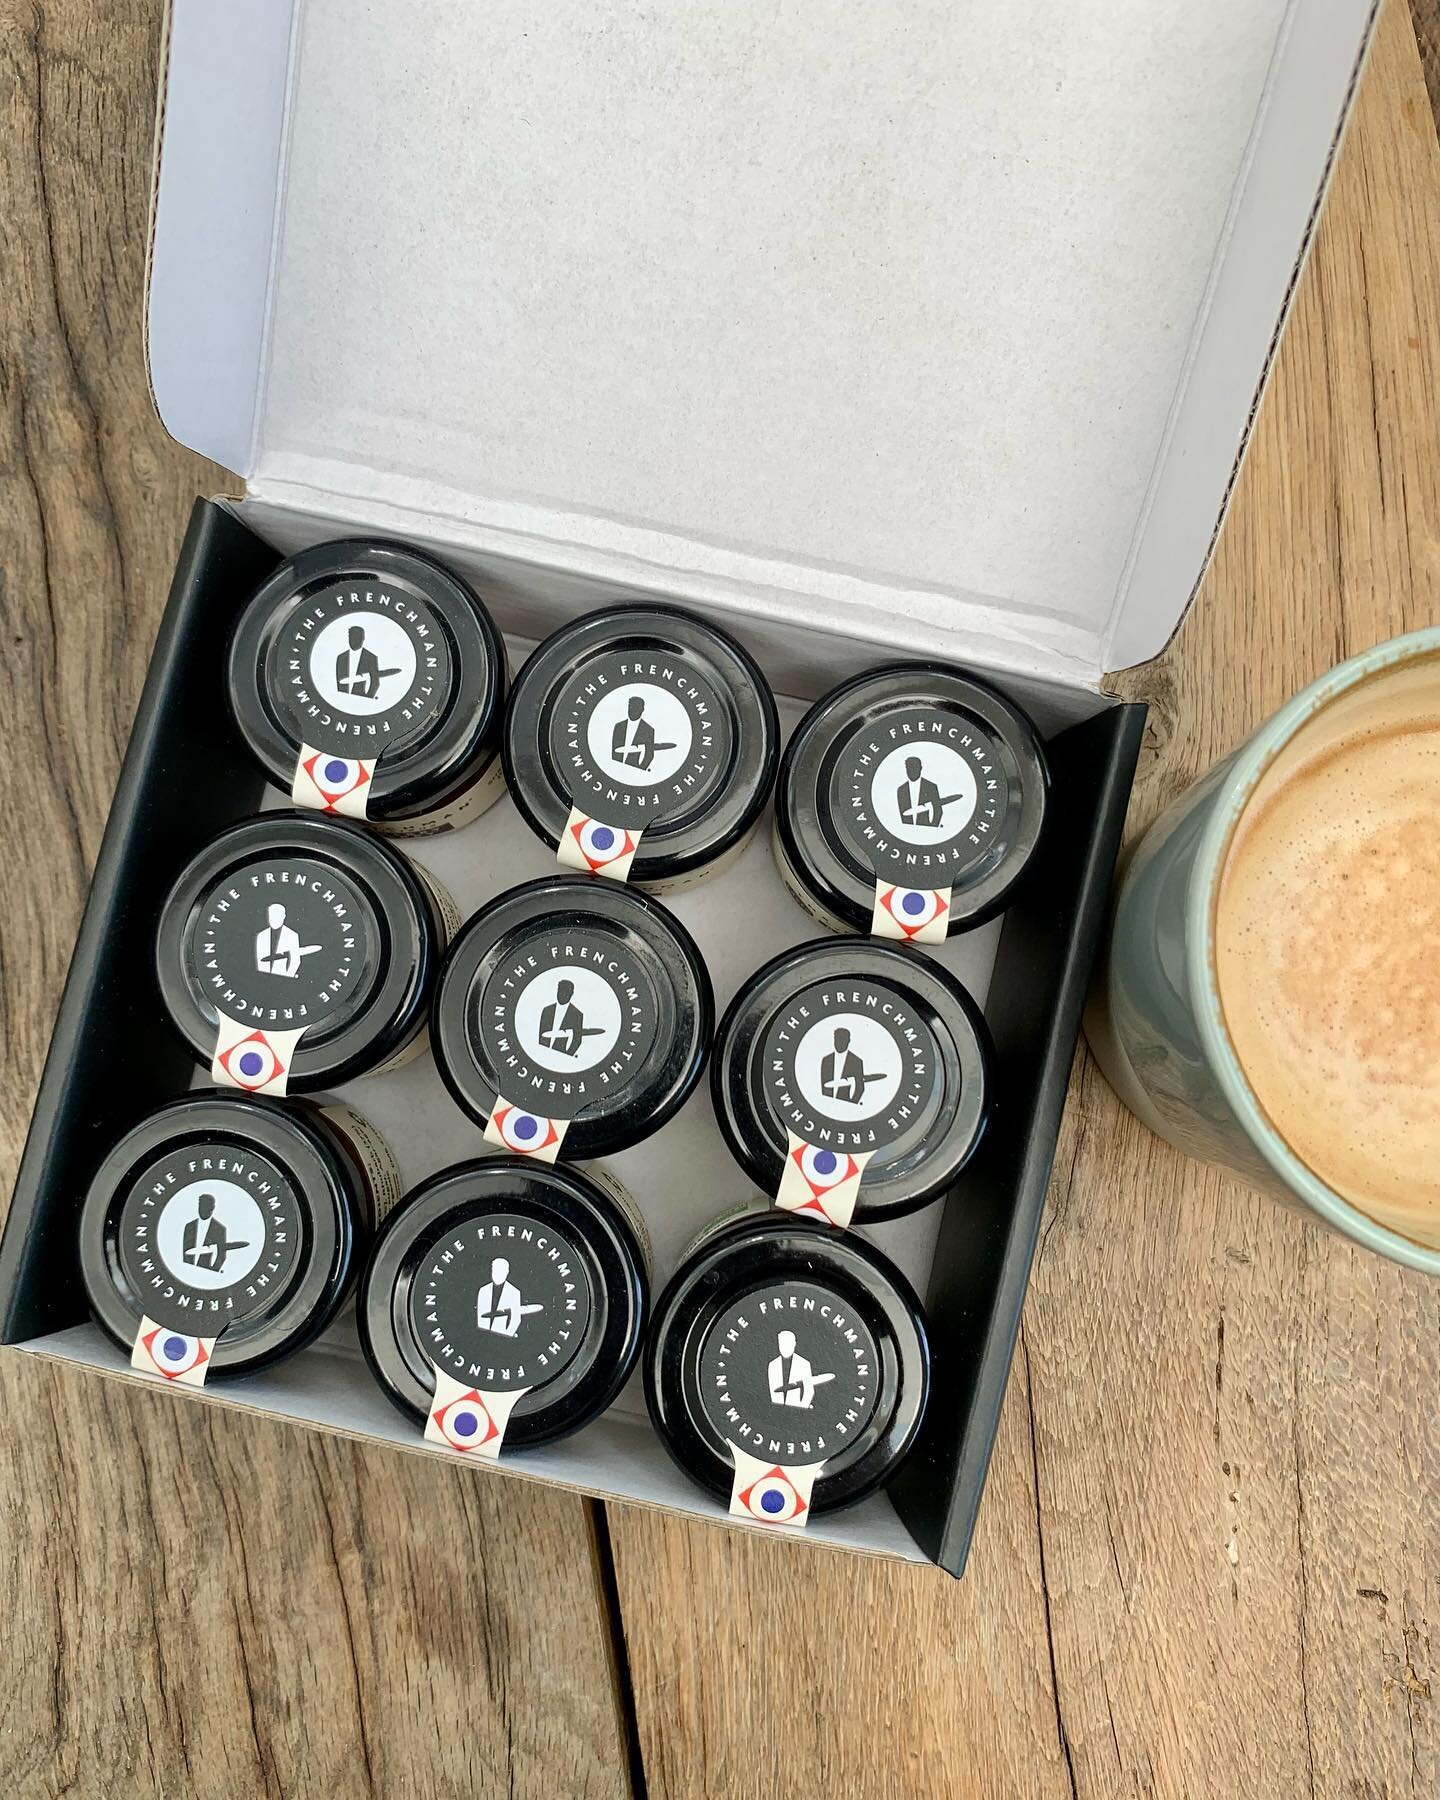 Want to be part of our journey? 

Pre-order our new discovery coffrets and help us develop some new products!

Discover our entire range of very d&eacute;licieux organic and low-sugar jams in this limited edition coffret.
The perfect gift for friends